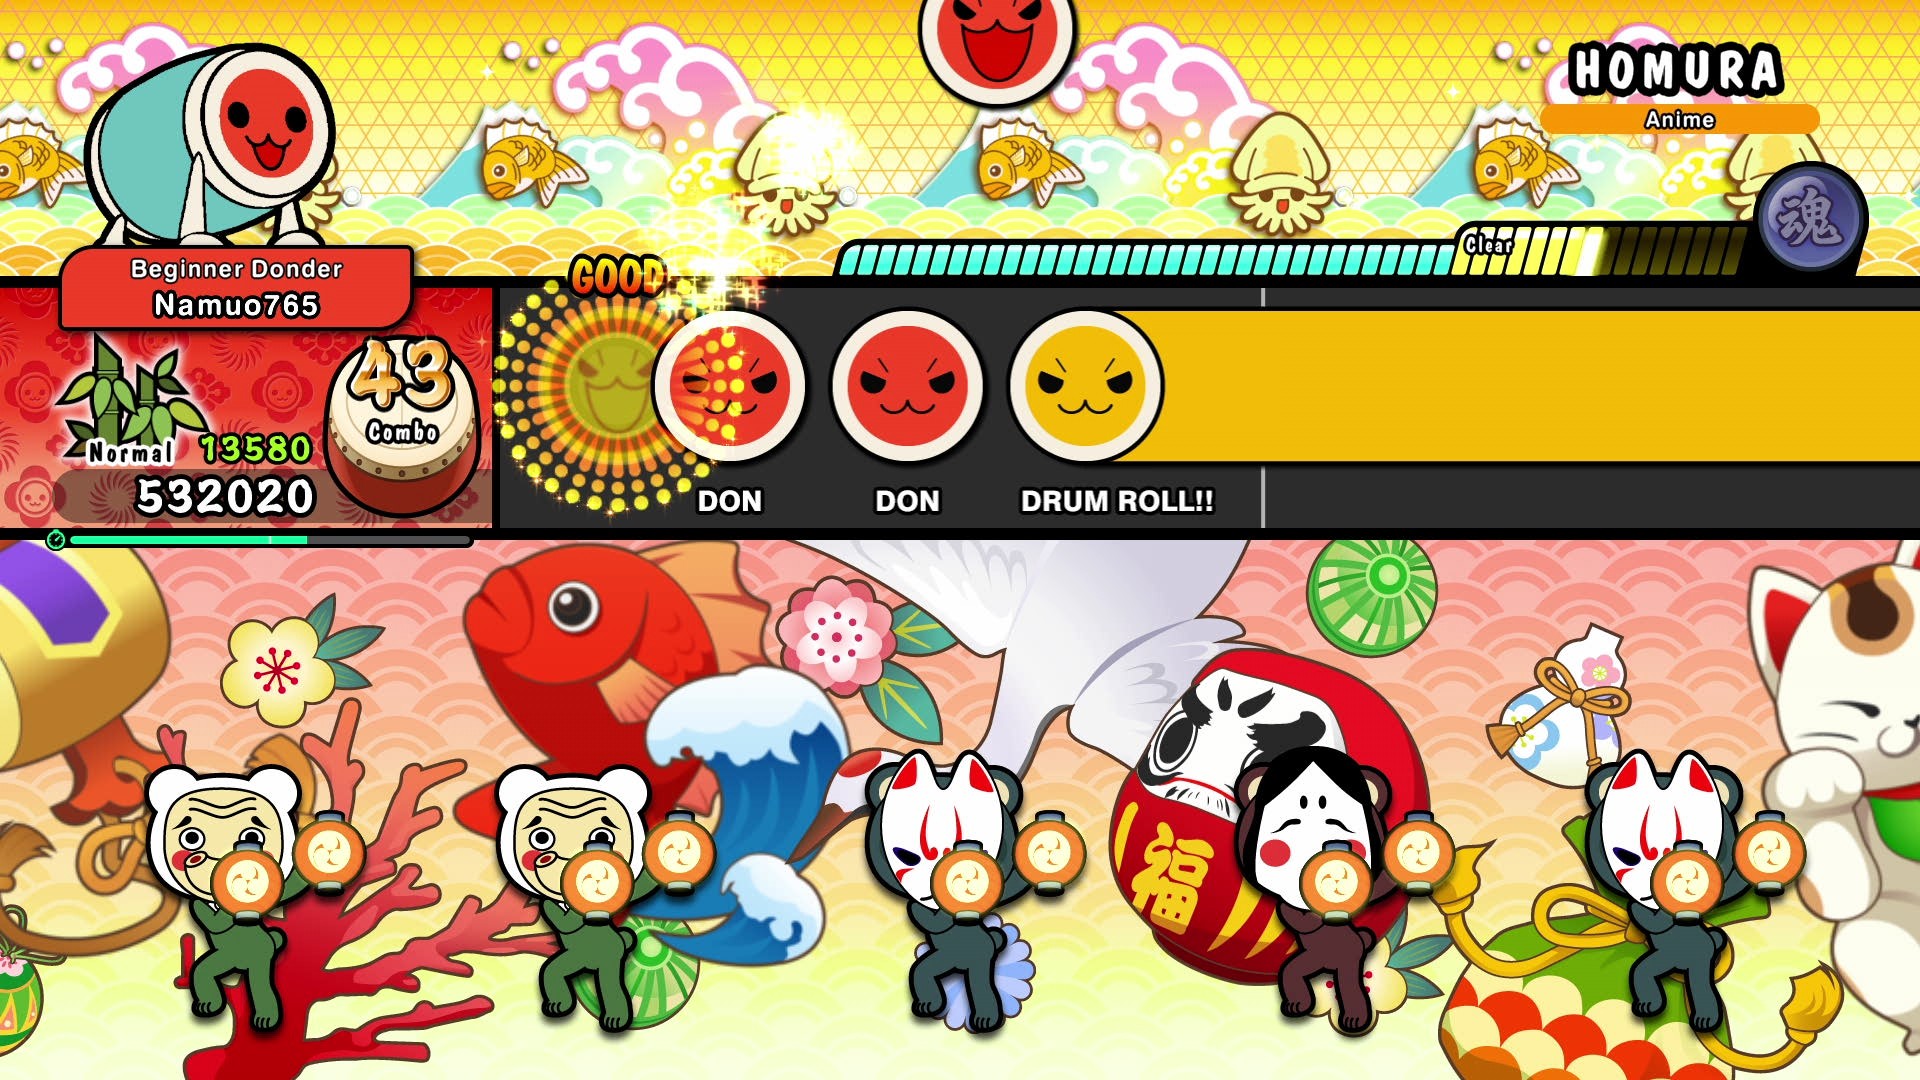 Taiko no Tatsujin: The Drum Master (Console and PC) - January 27 – Xbox Game Pass